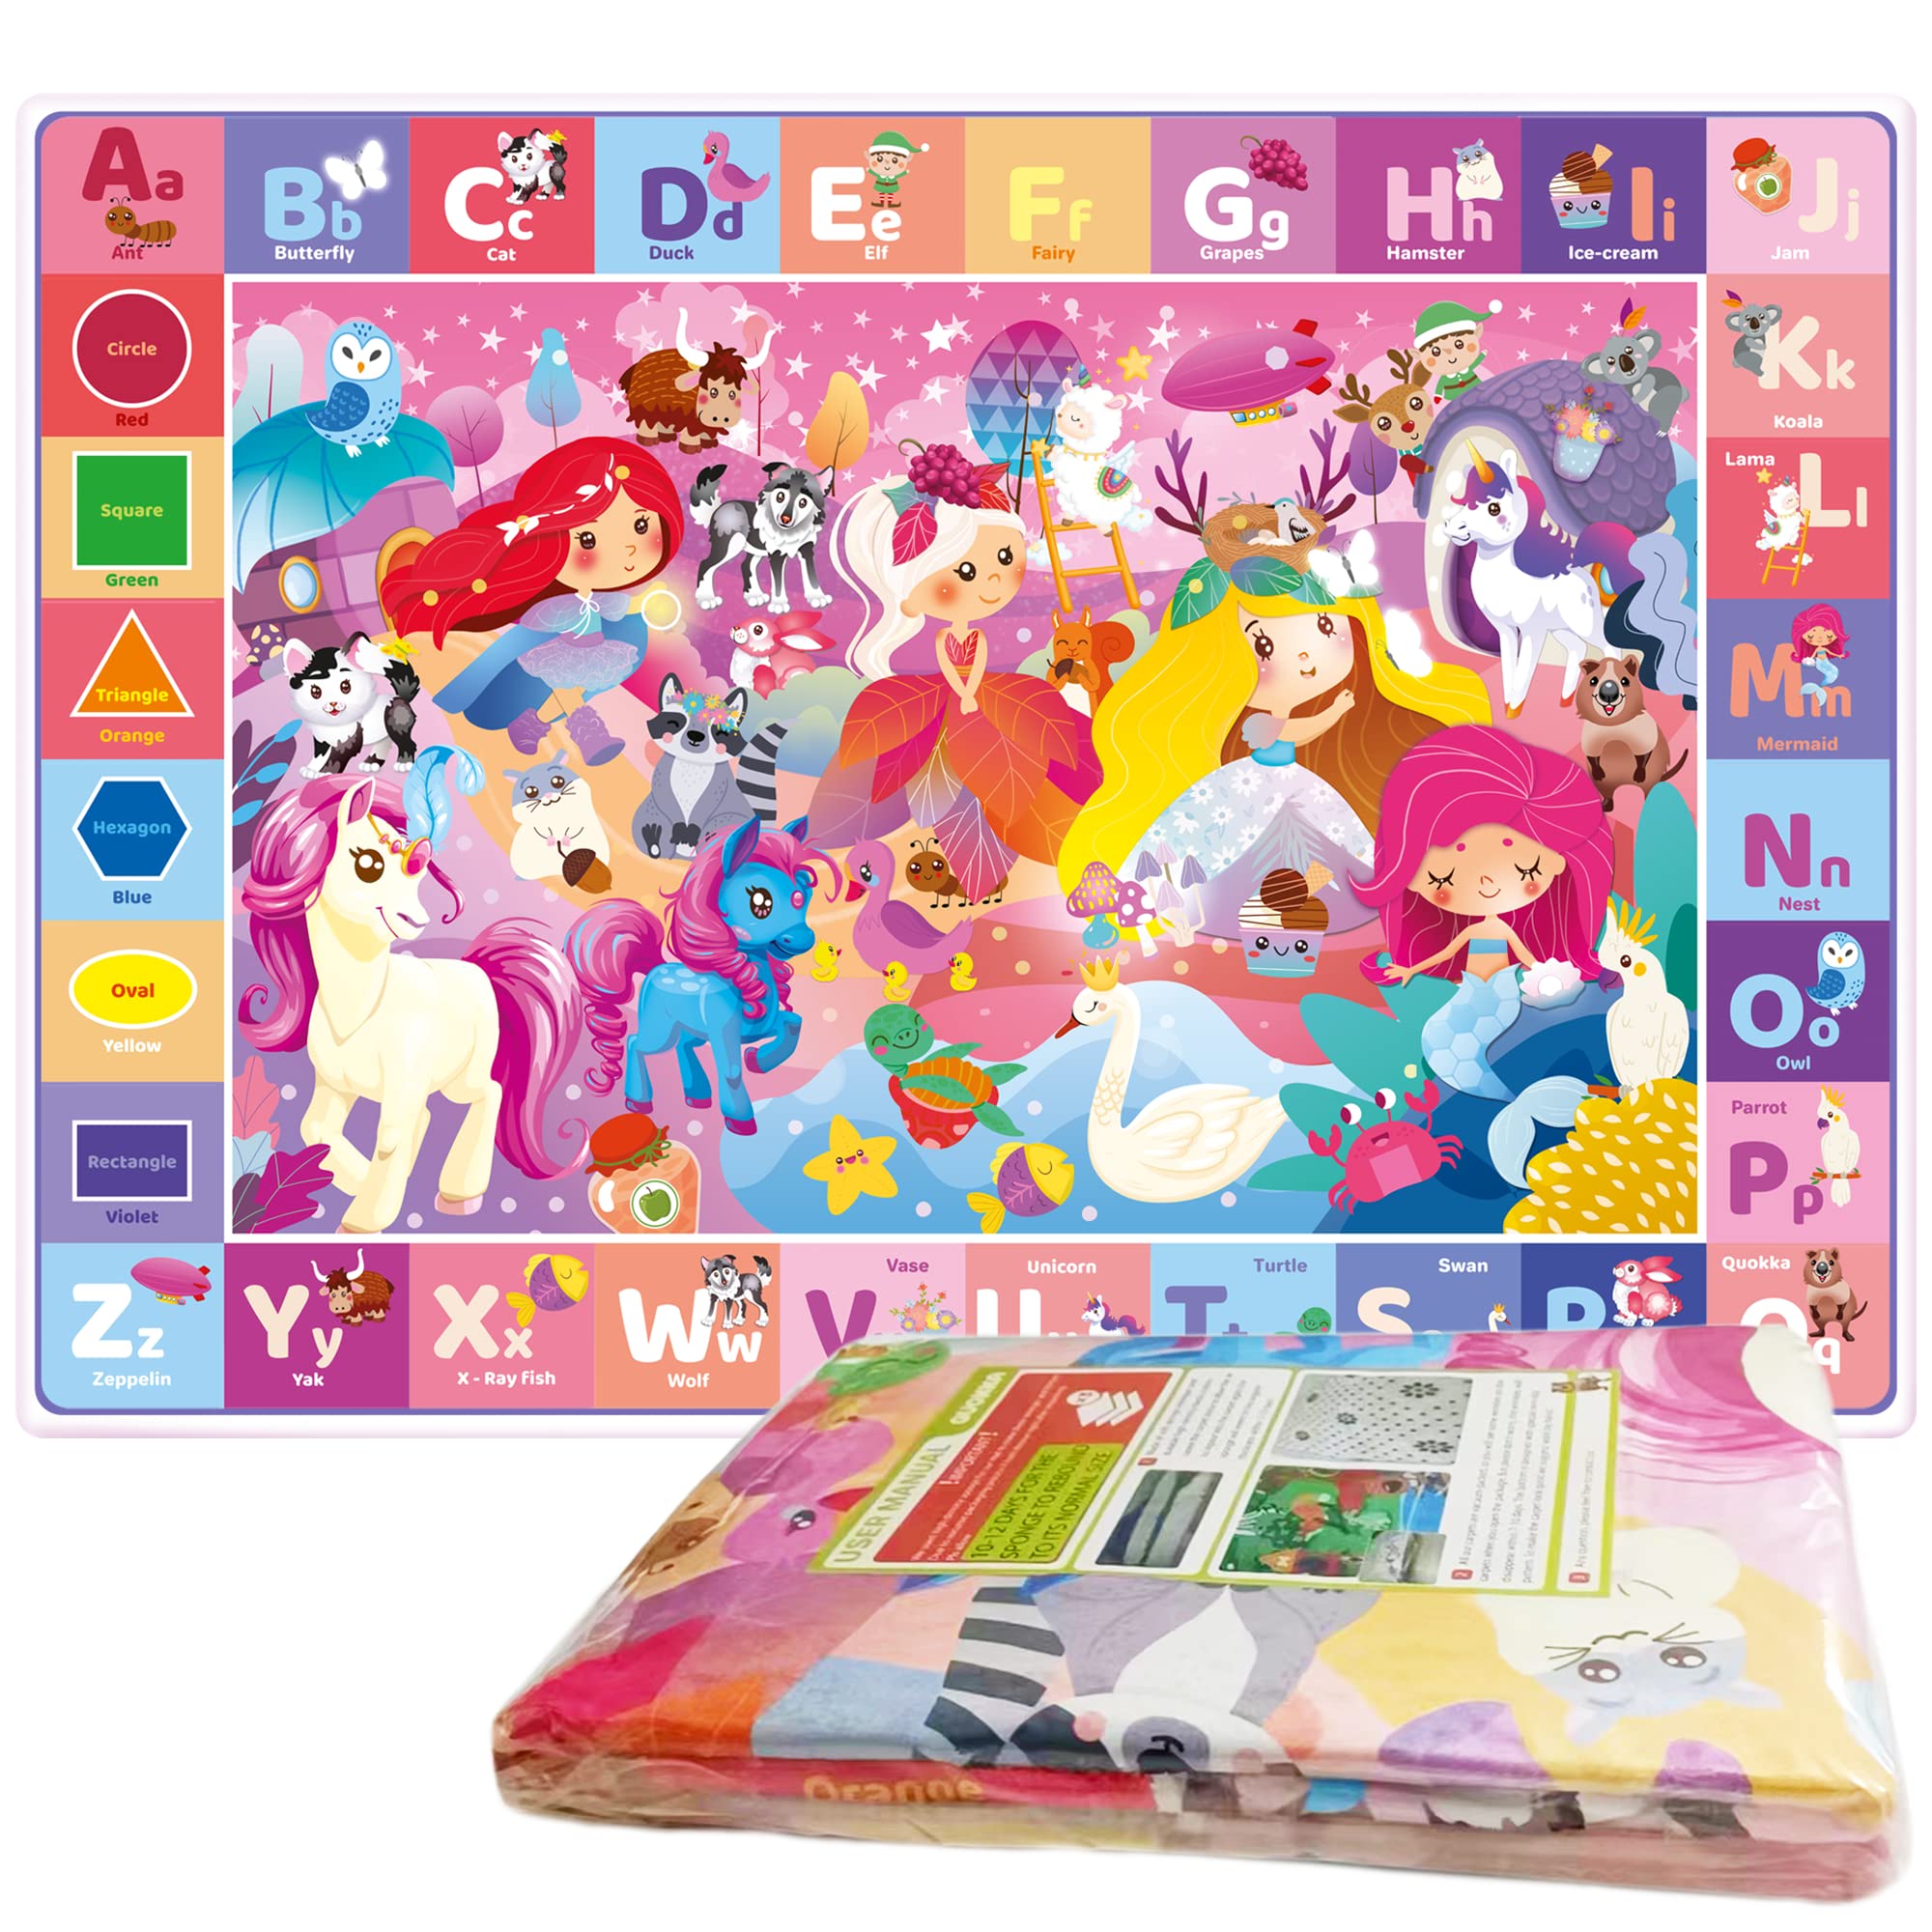 QUOKKA Playmats for Babies and Toddlers ABC Play Mat for Kids Baby Infants - Super Soft Plush Extra Thick (0.8cm) Large Alphabet Rug with Unicorn Princess - Padded Foldable Non-Slip Mat